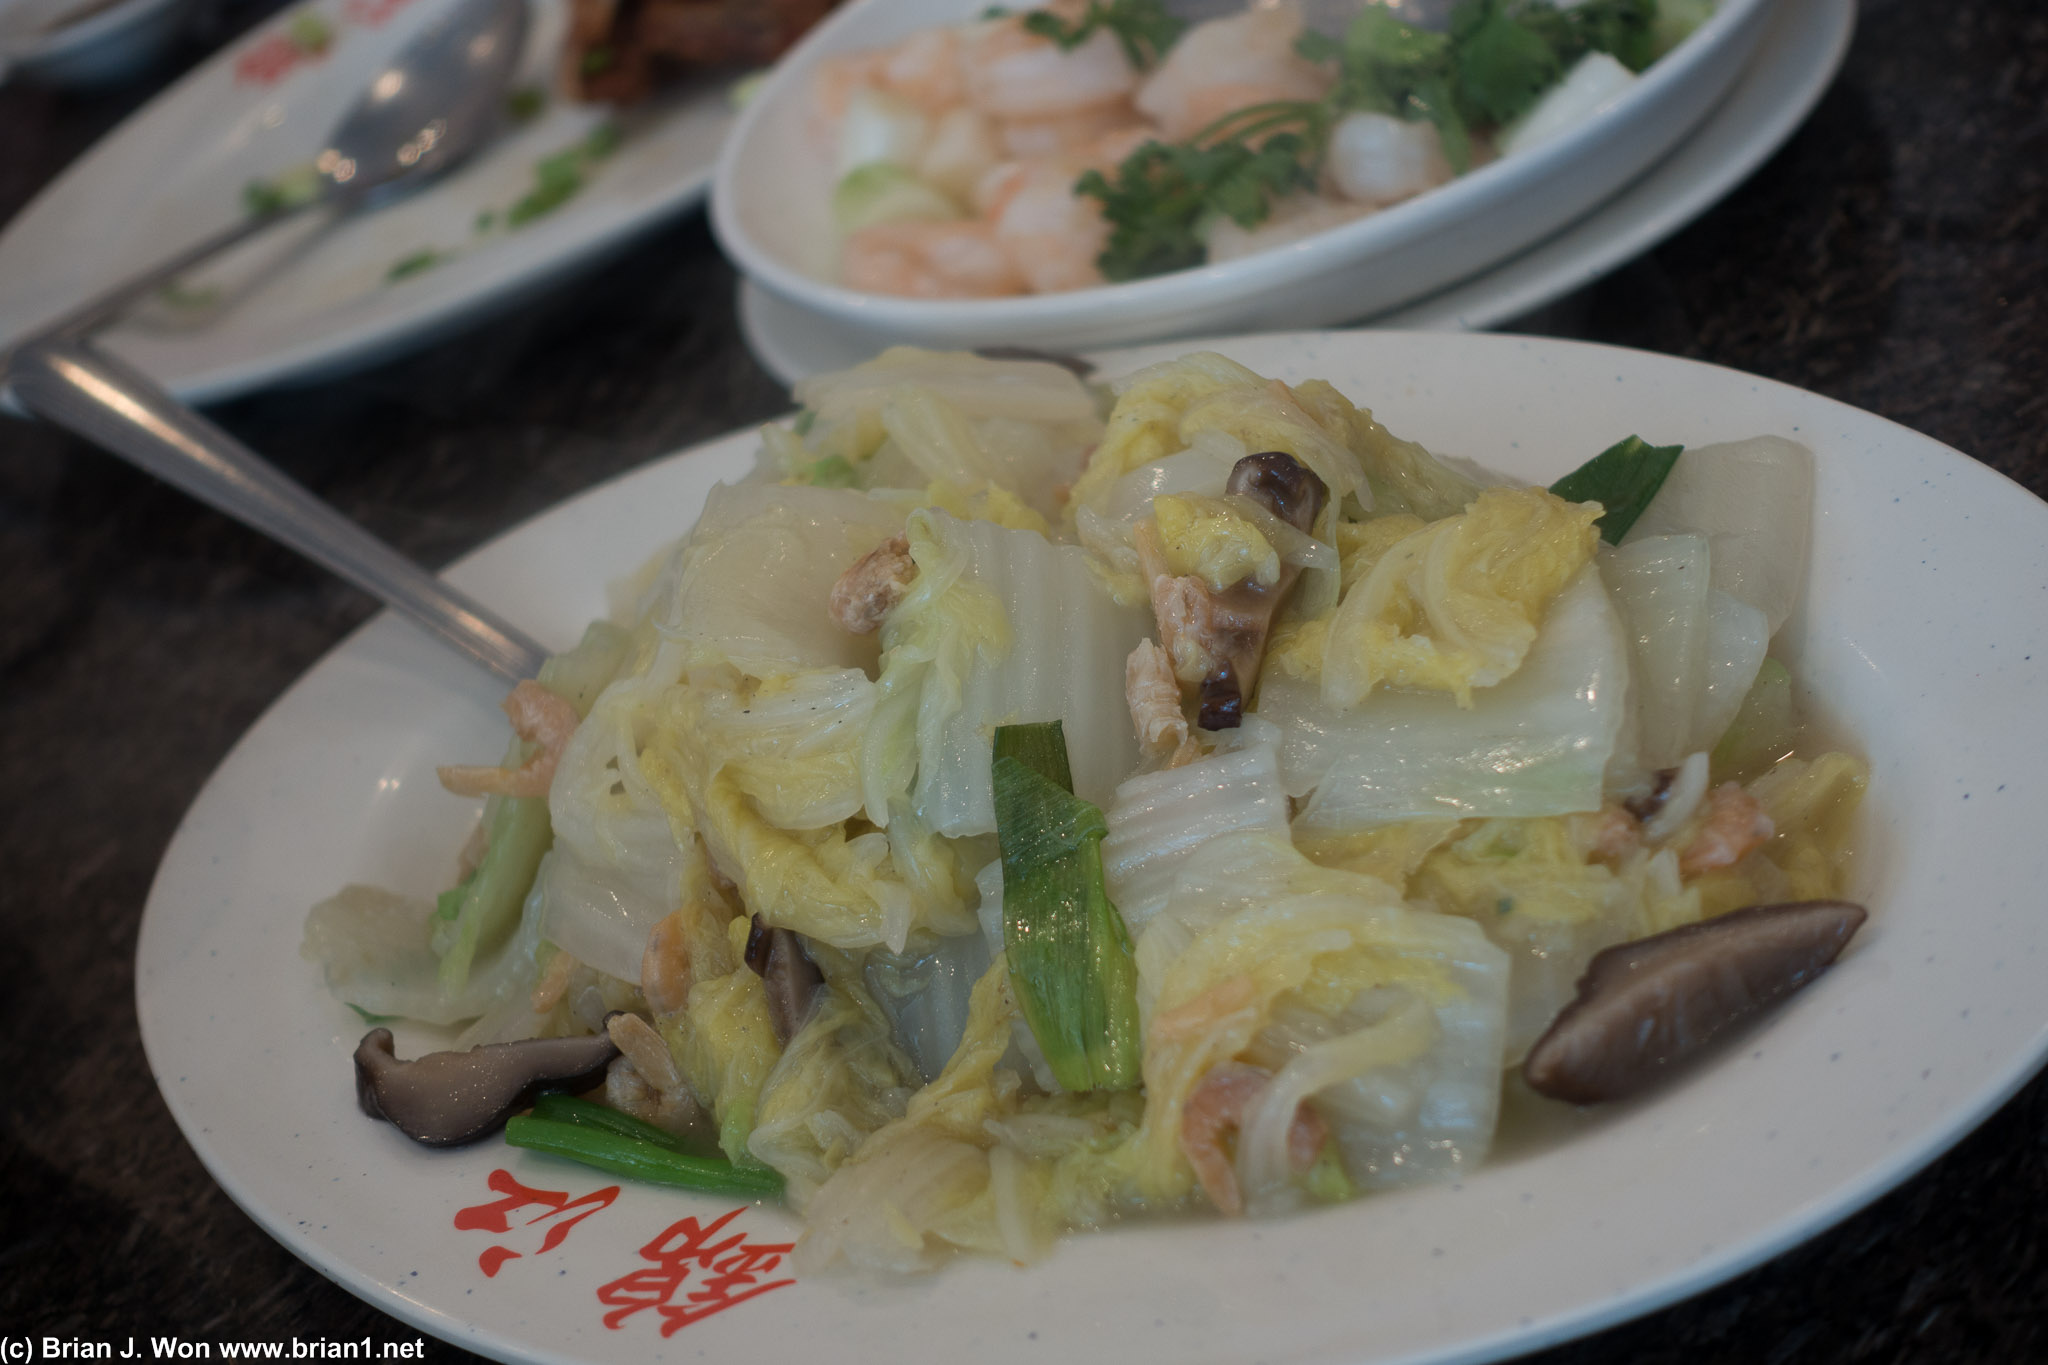 Napa cabbage with dried shrimp. Far inferior to Mom's.